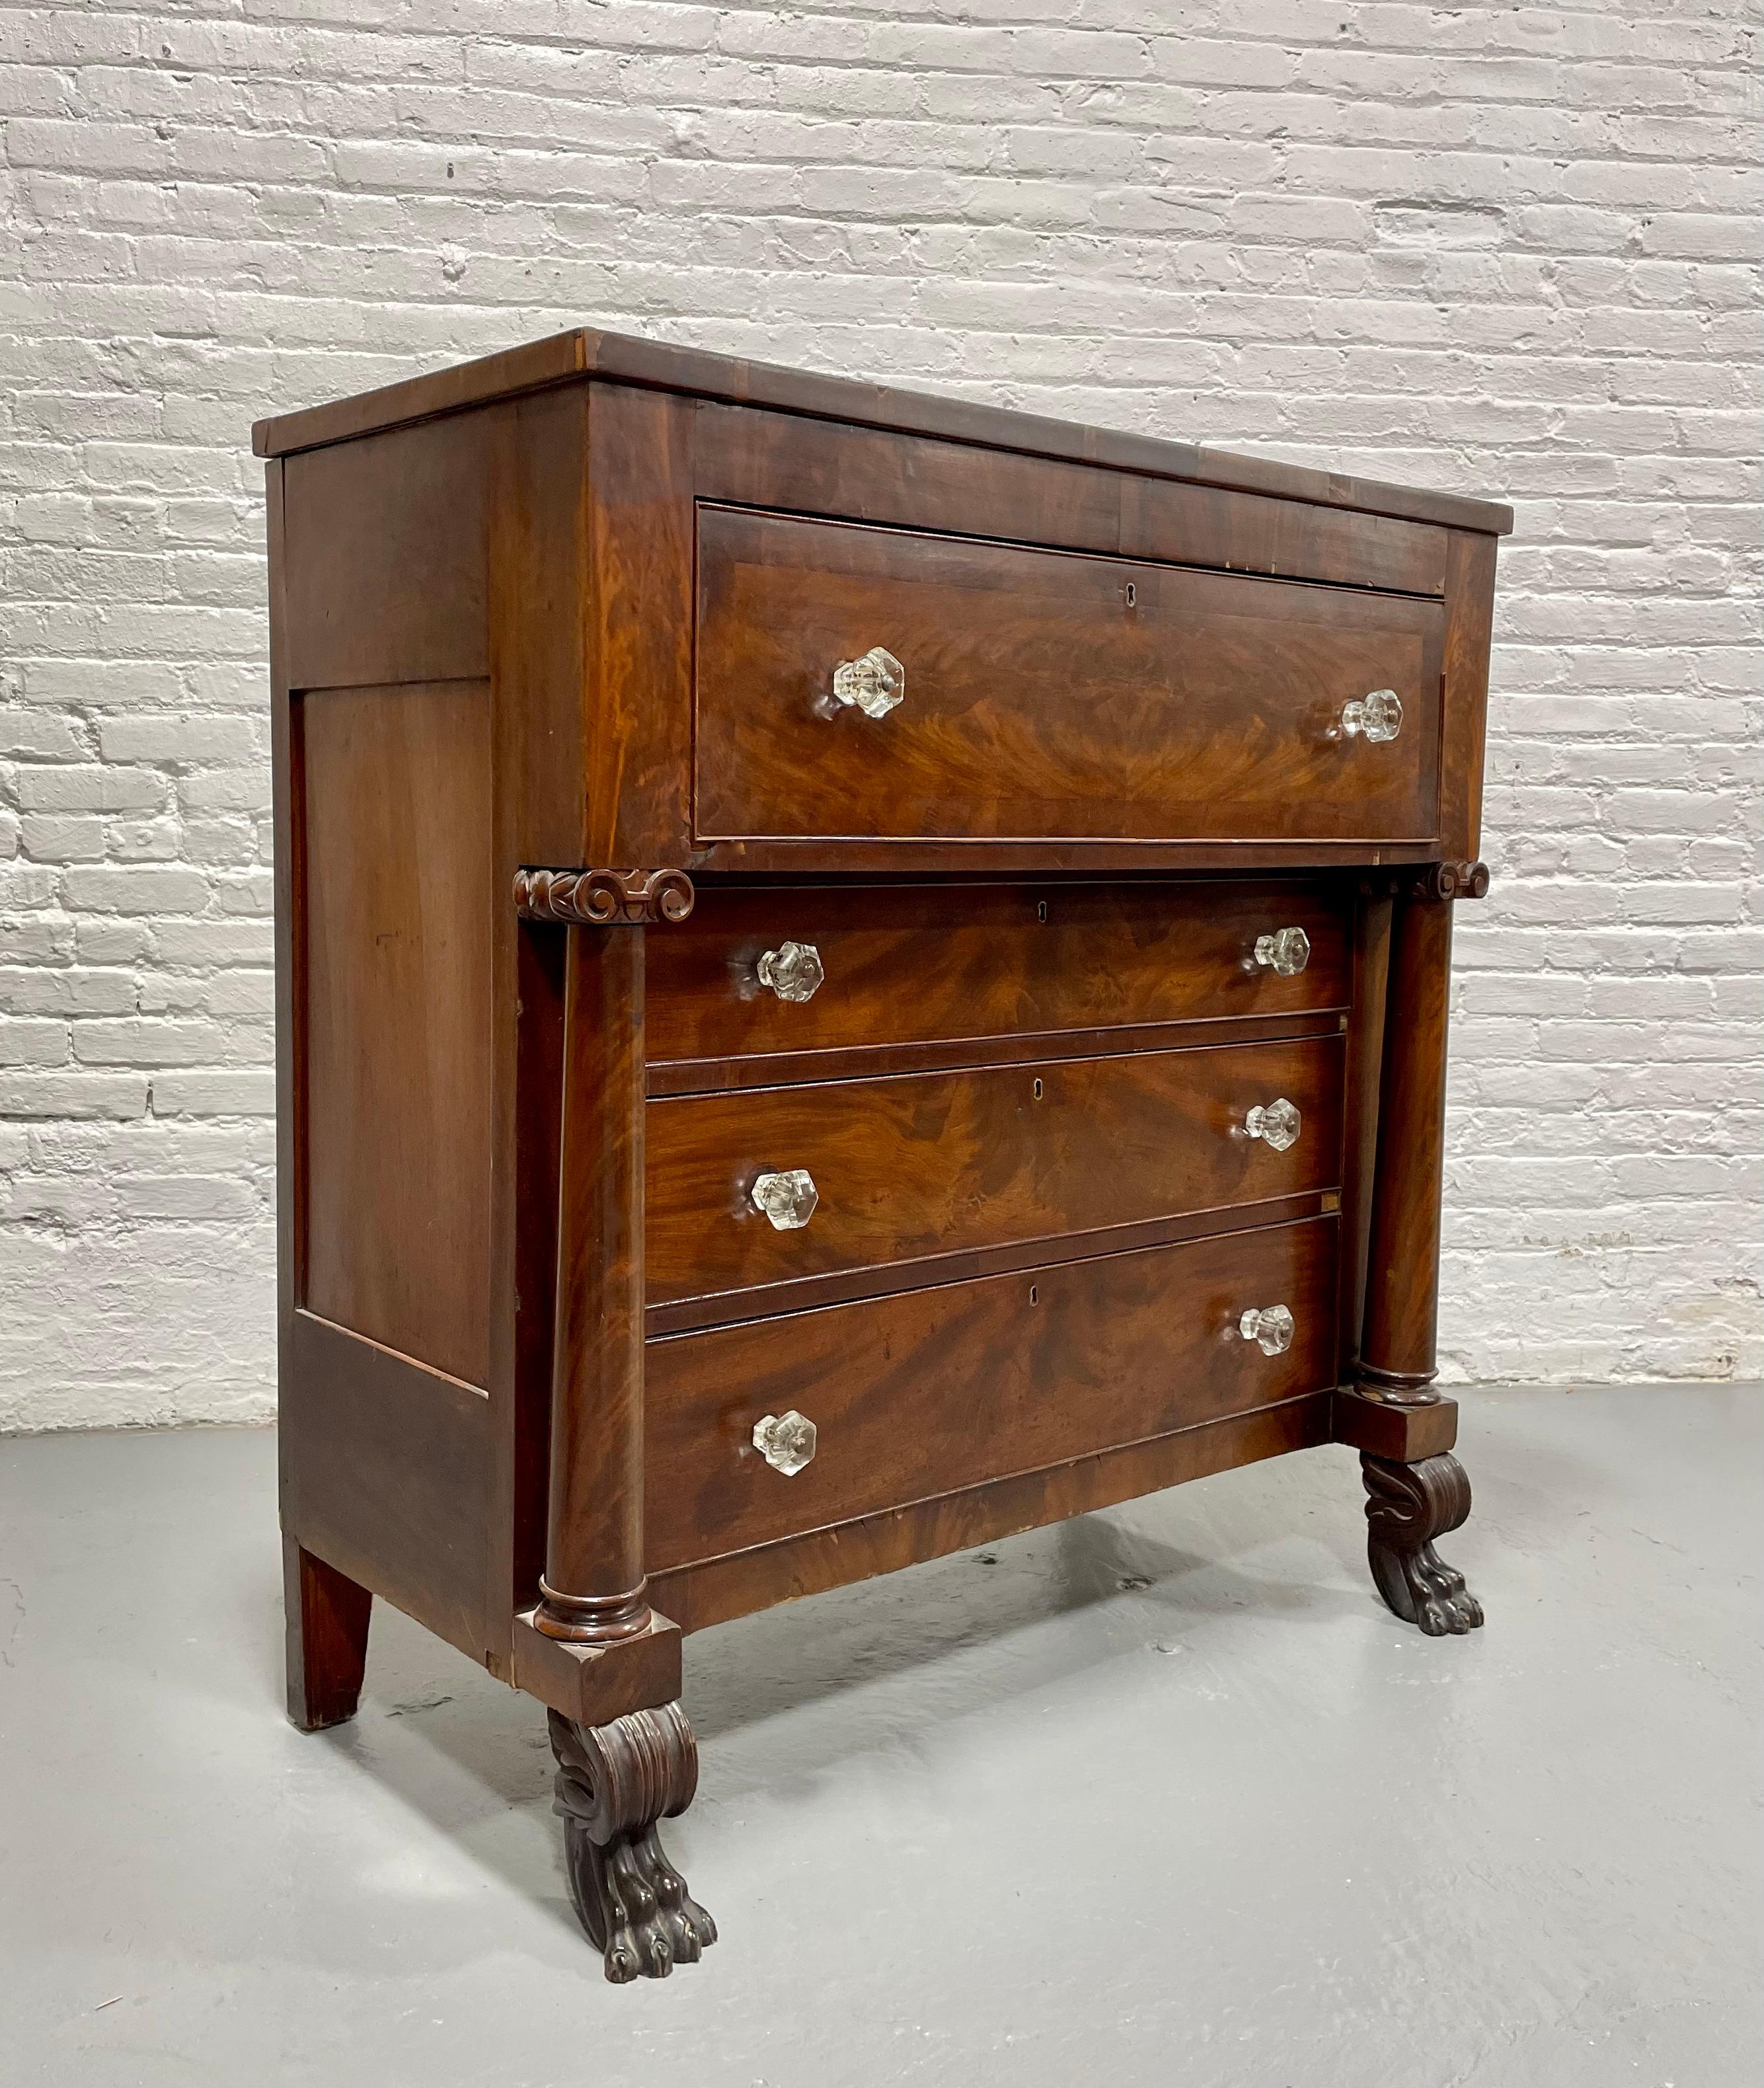 Antique figured Mahogany Empire Chest of Drawers featuring original glass pulls, full columns and hand cut dovetailed drawers. The four large drawers are flanked by elegant rounded columns topped with carved accents and raised on clawfoot front